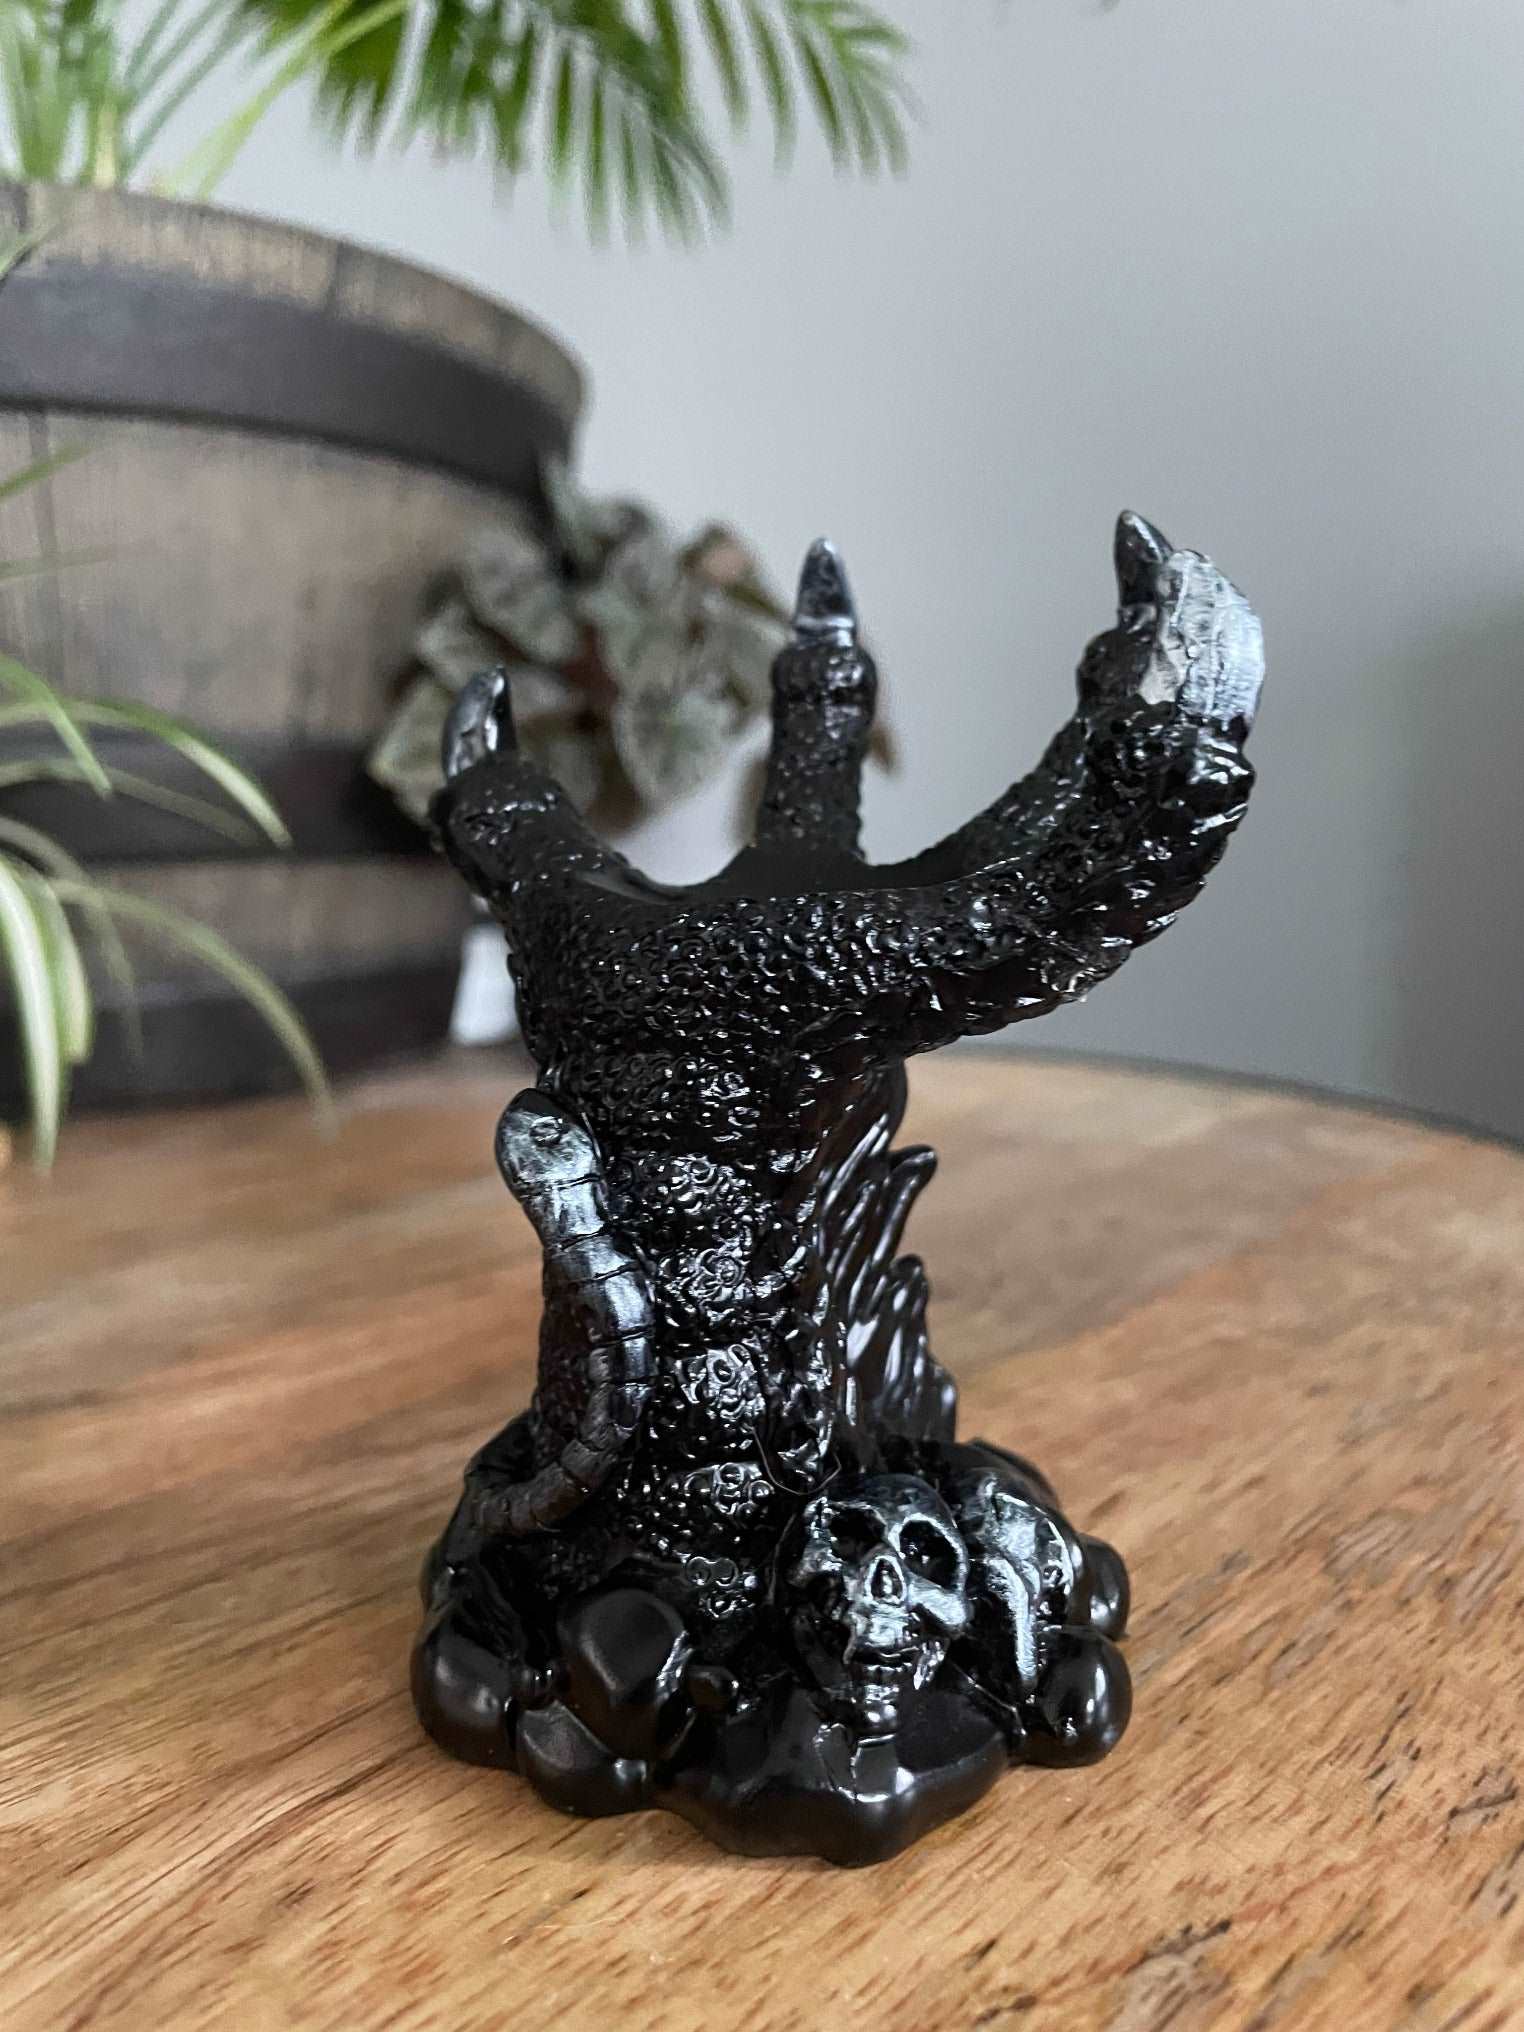 Pictured is a sphere stand in the shape of a black dragon's claw.